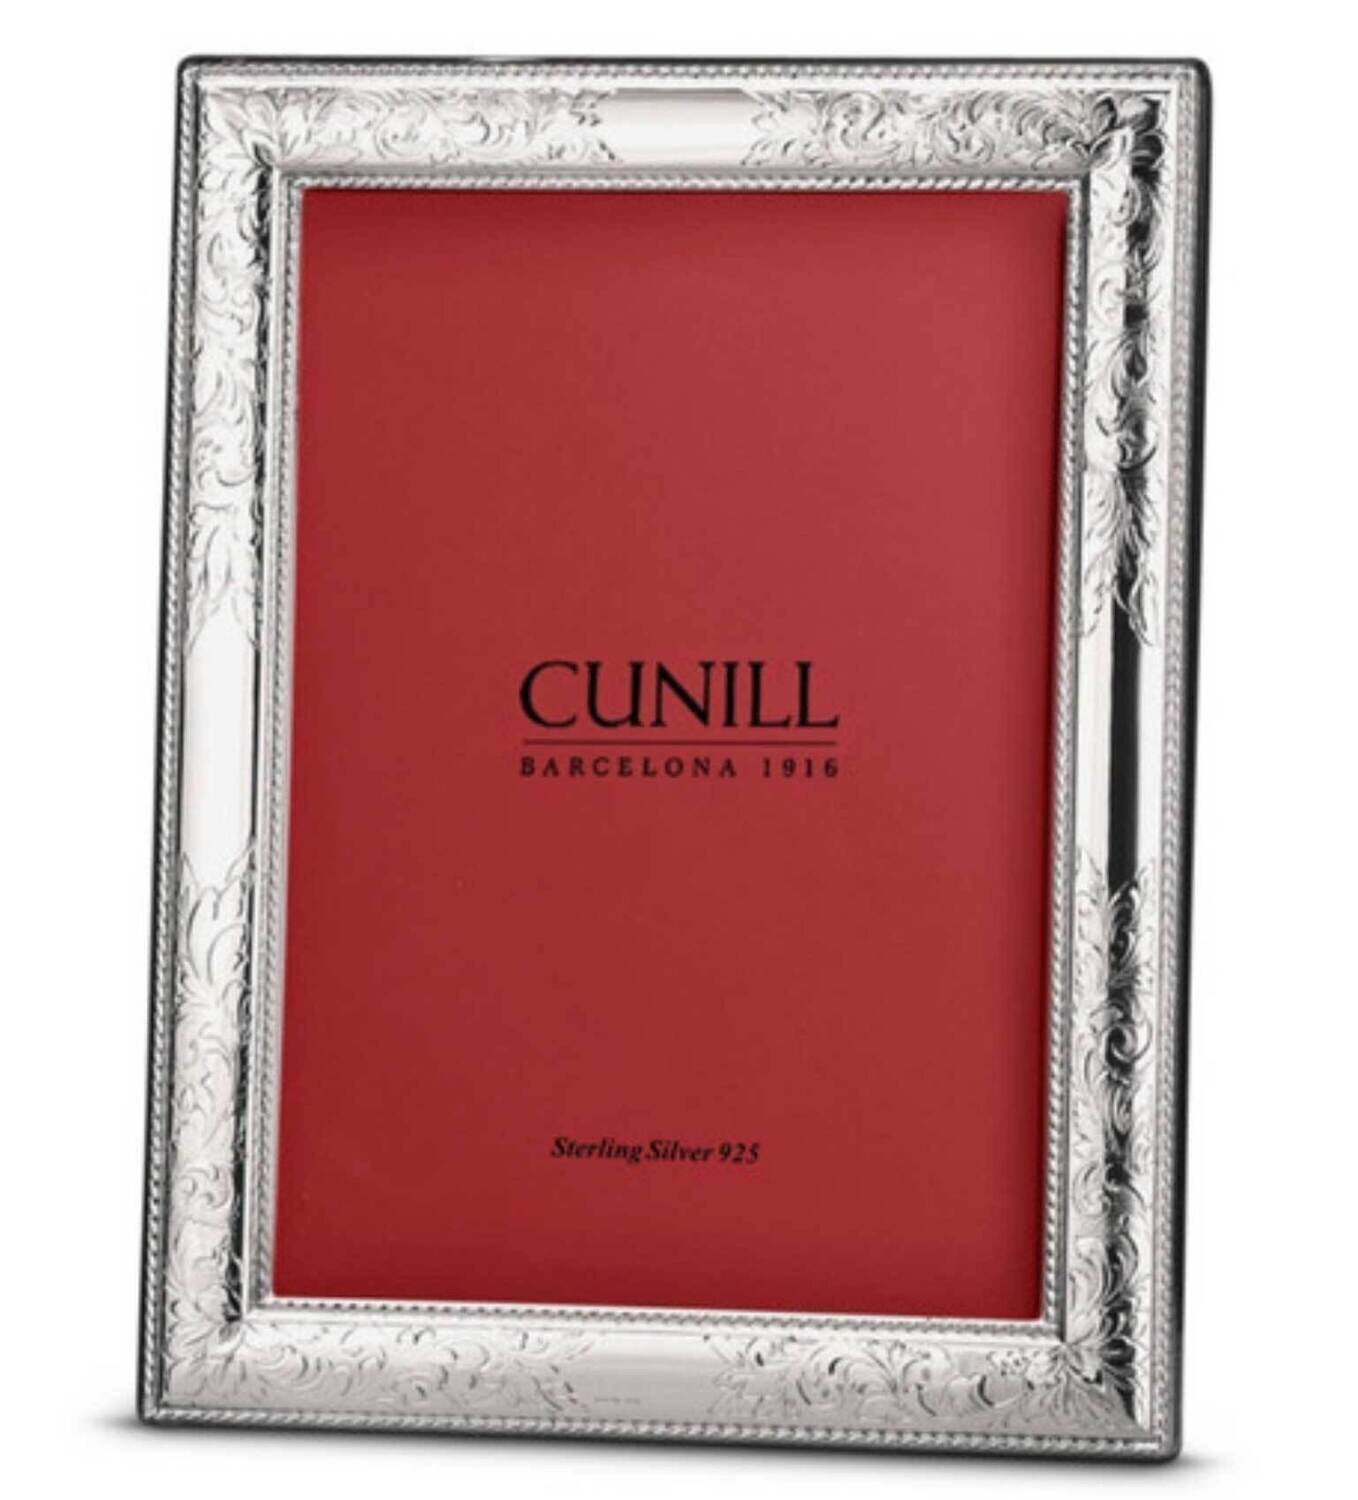 Cunill Vintage Triple 2x3 Inch Hinged Picture Frame .925 Sterling Silver 123T